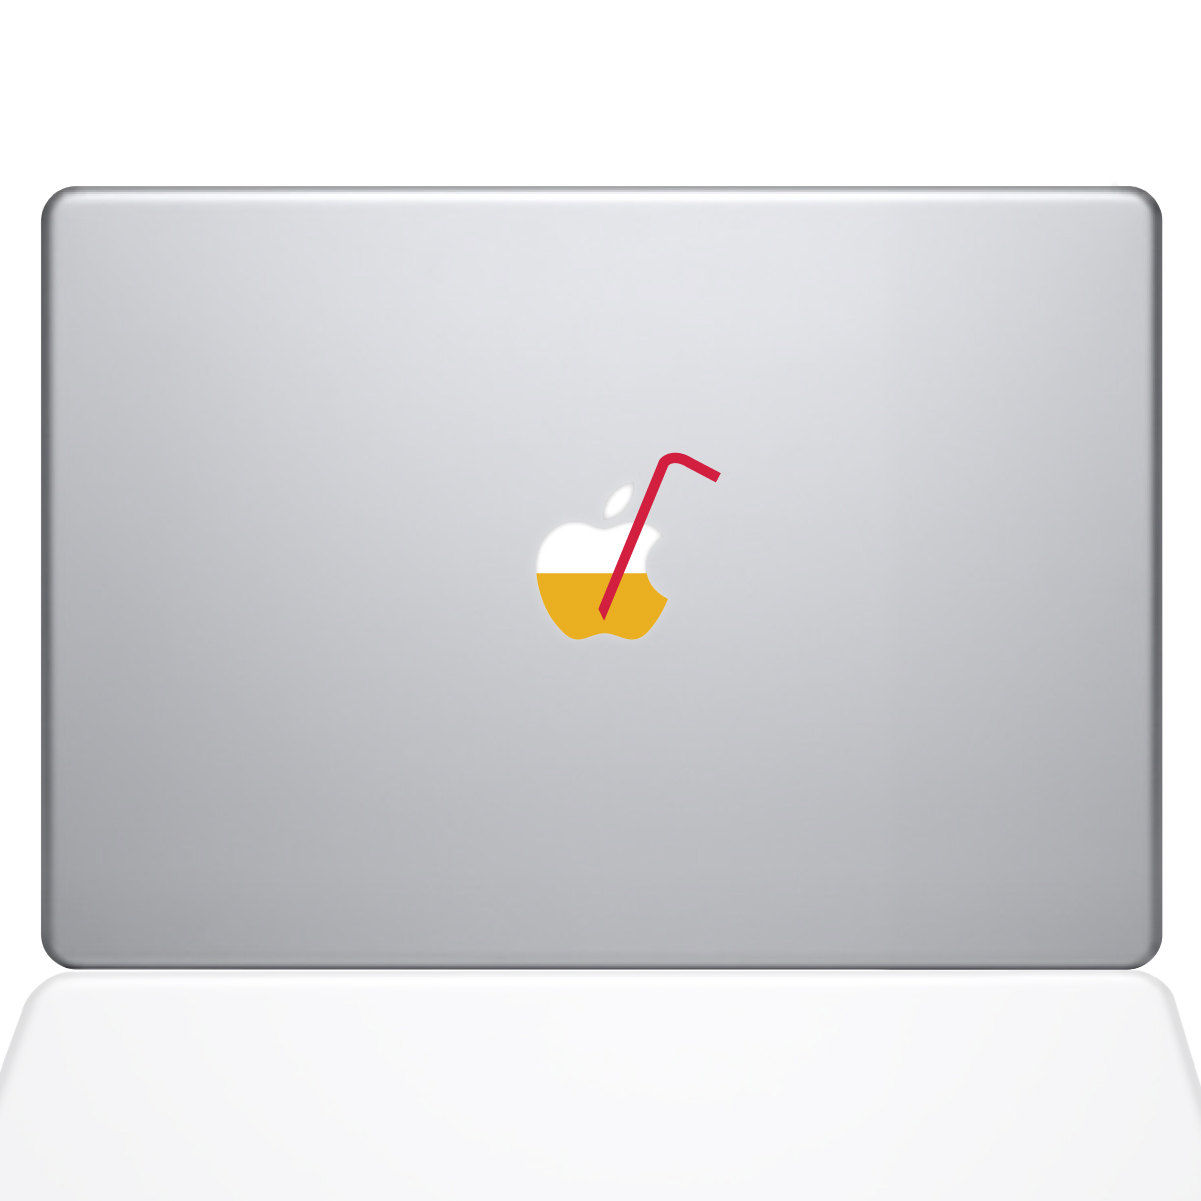 Apple Juice with Straw Macbook Decal